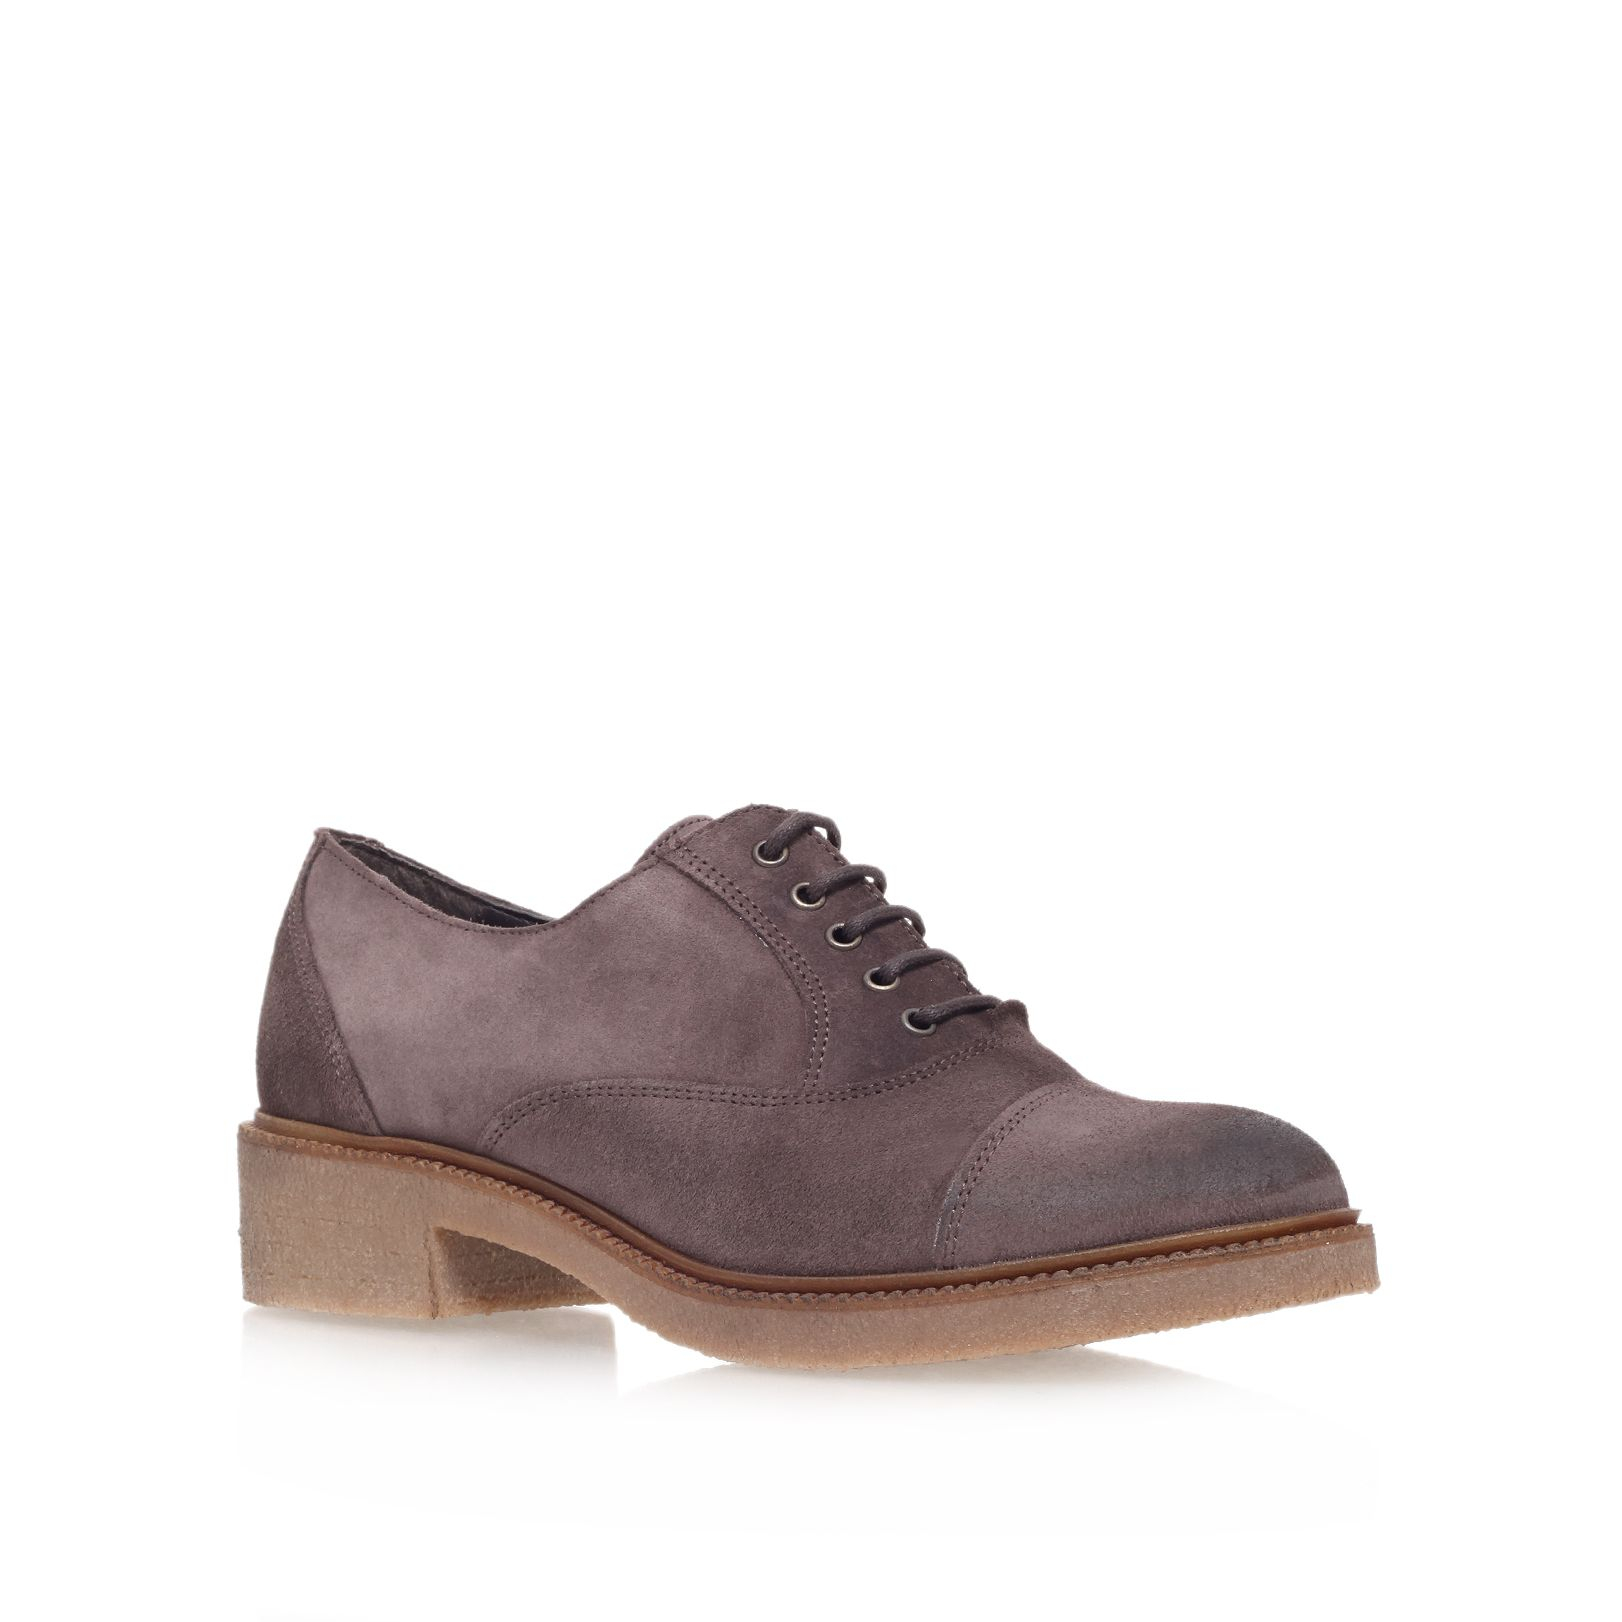 ... Kurt Geiger Loopy Low Heel Lace Up Shoes in Gray (Light Grey) | Lyst